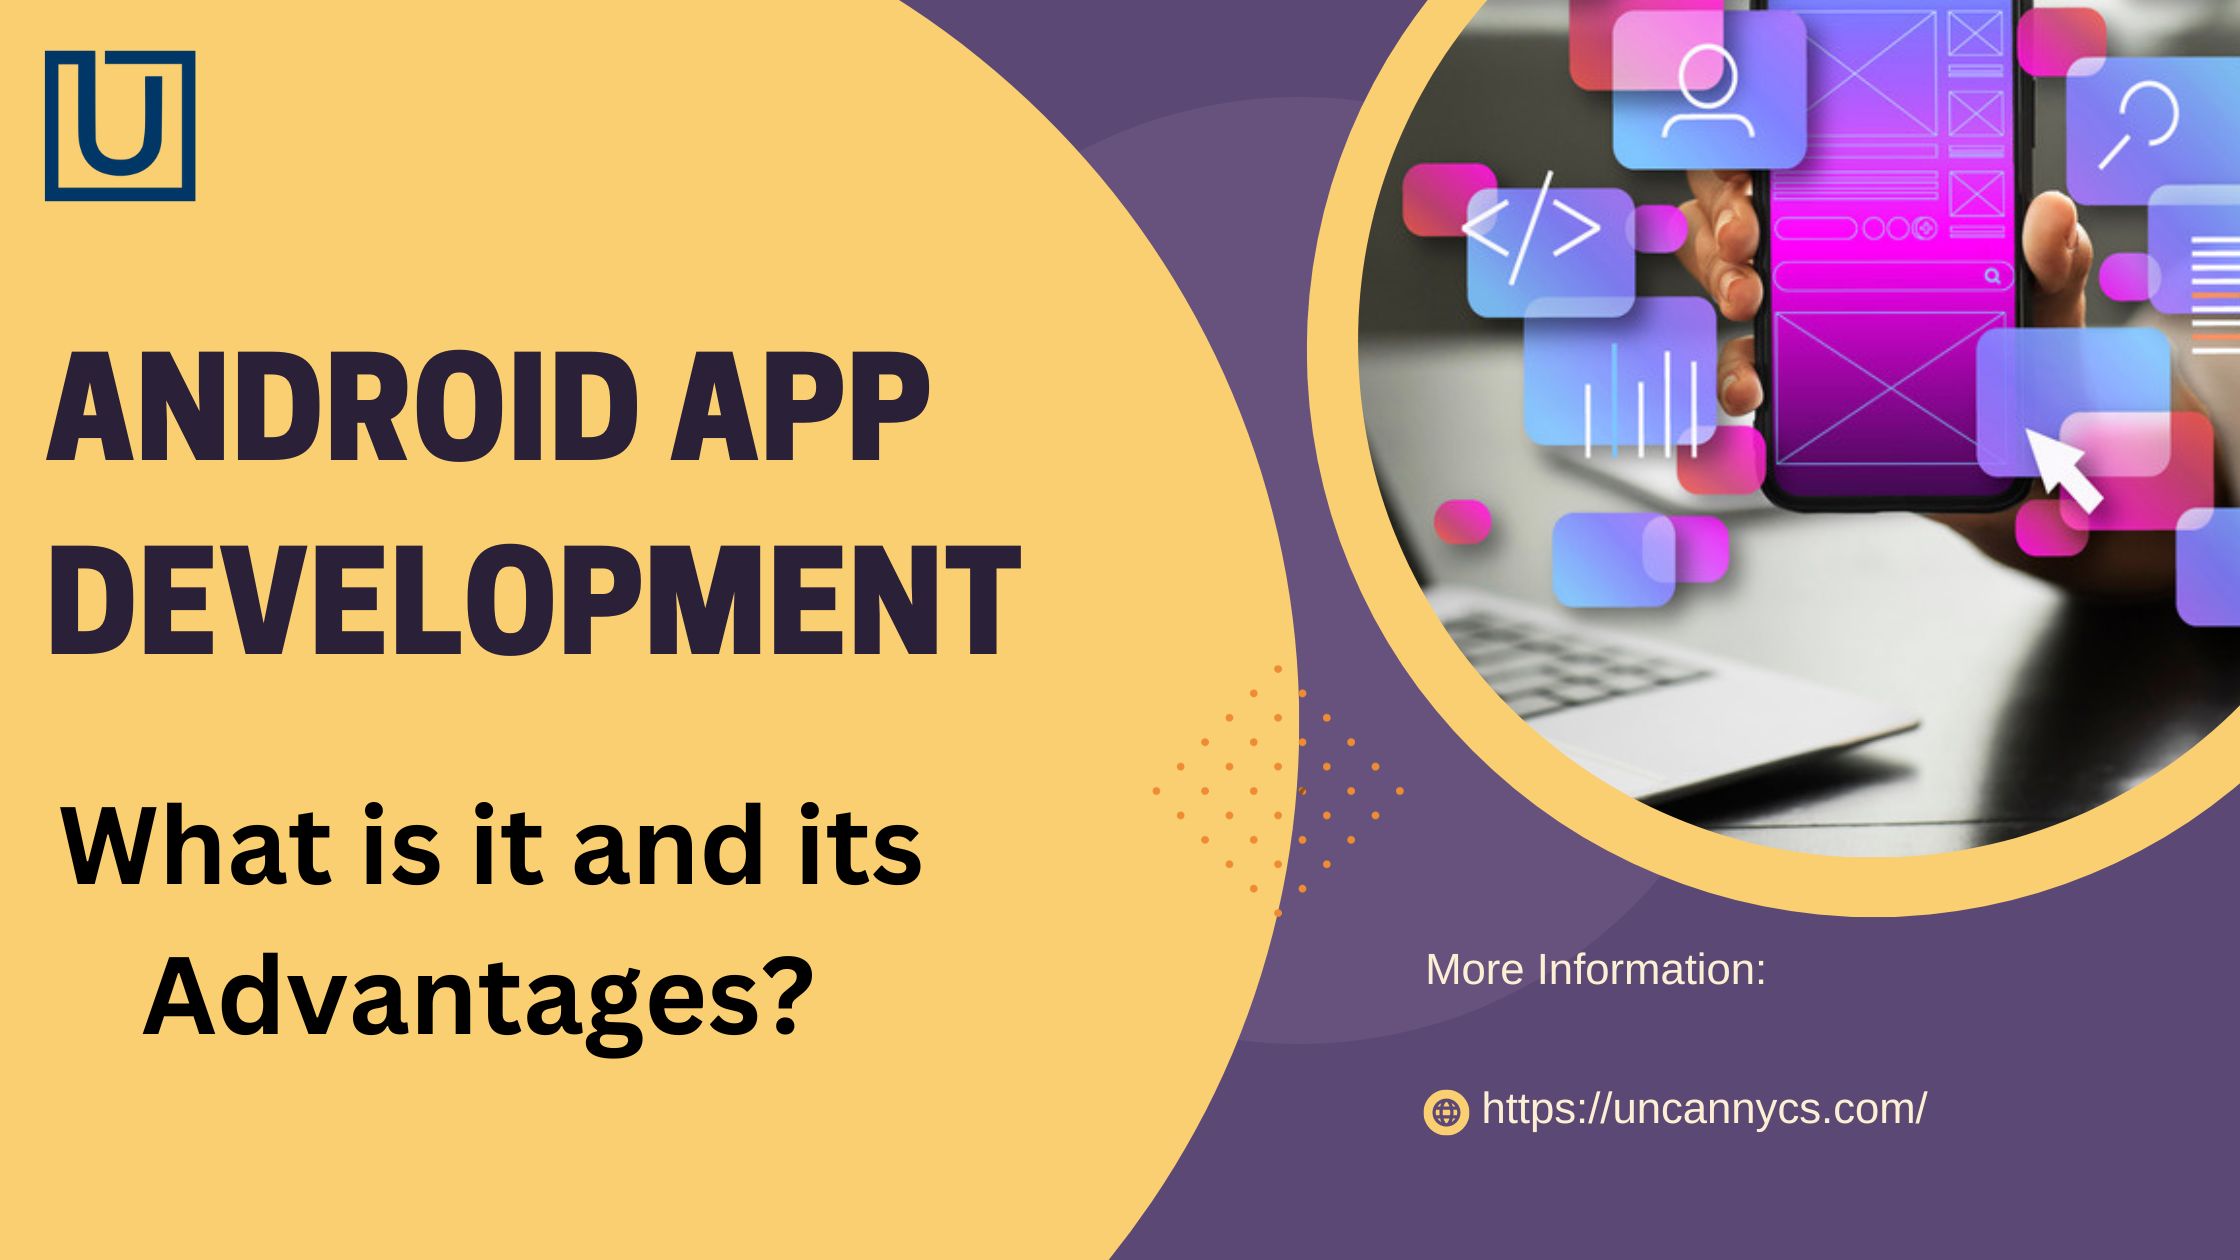 Android App Development - What is it and its Advantages?